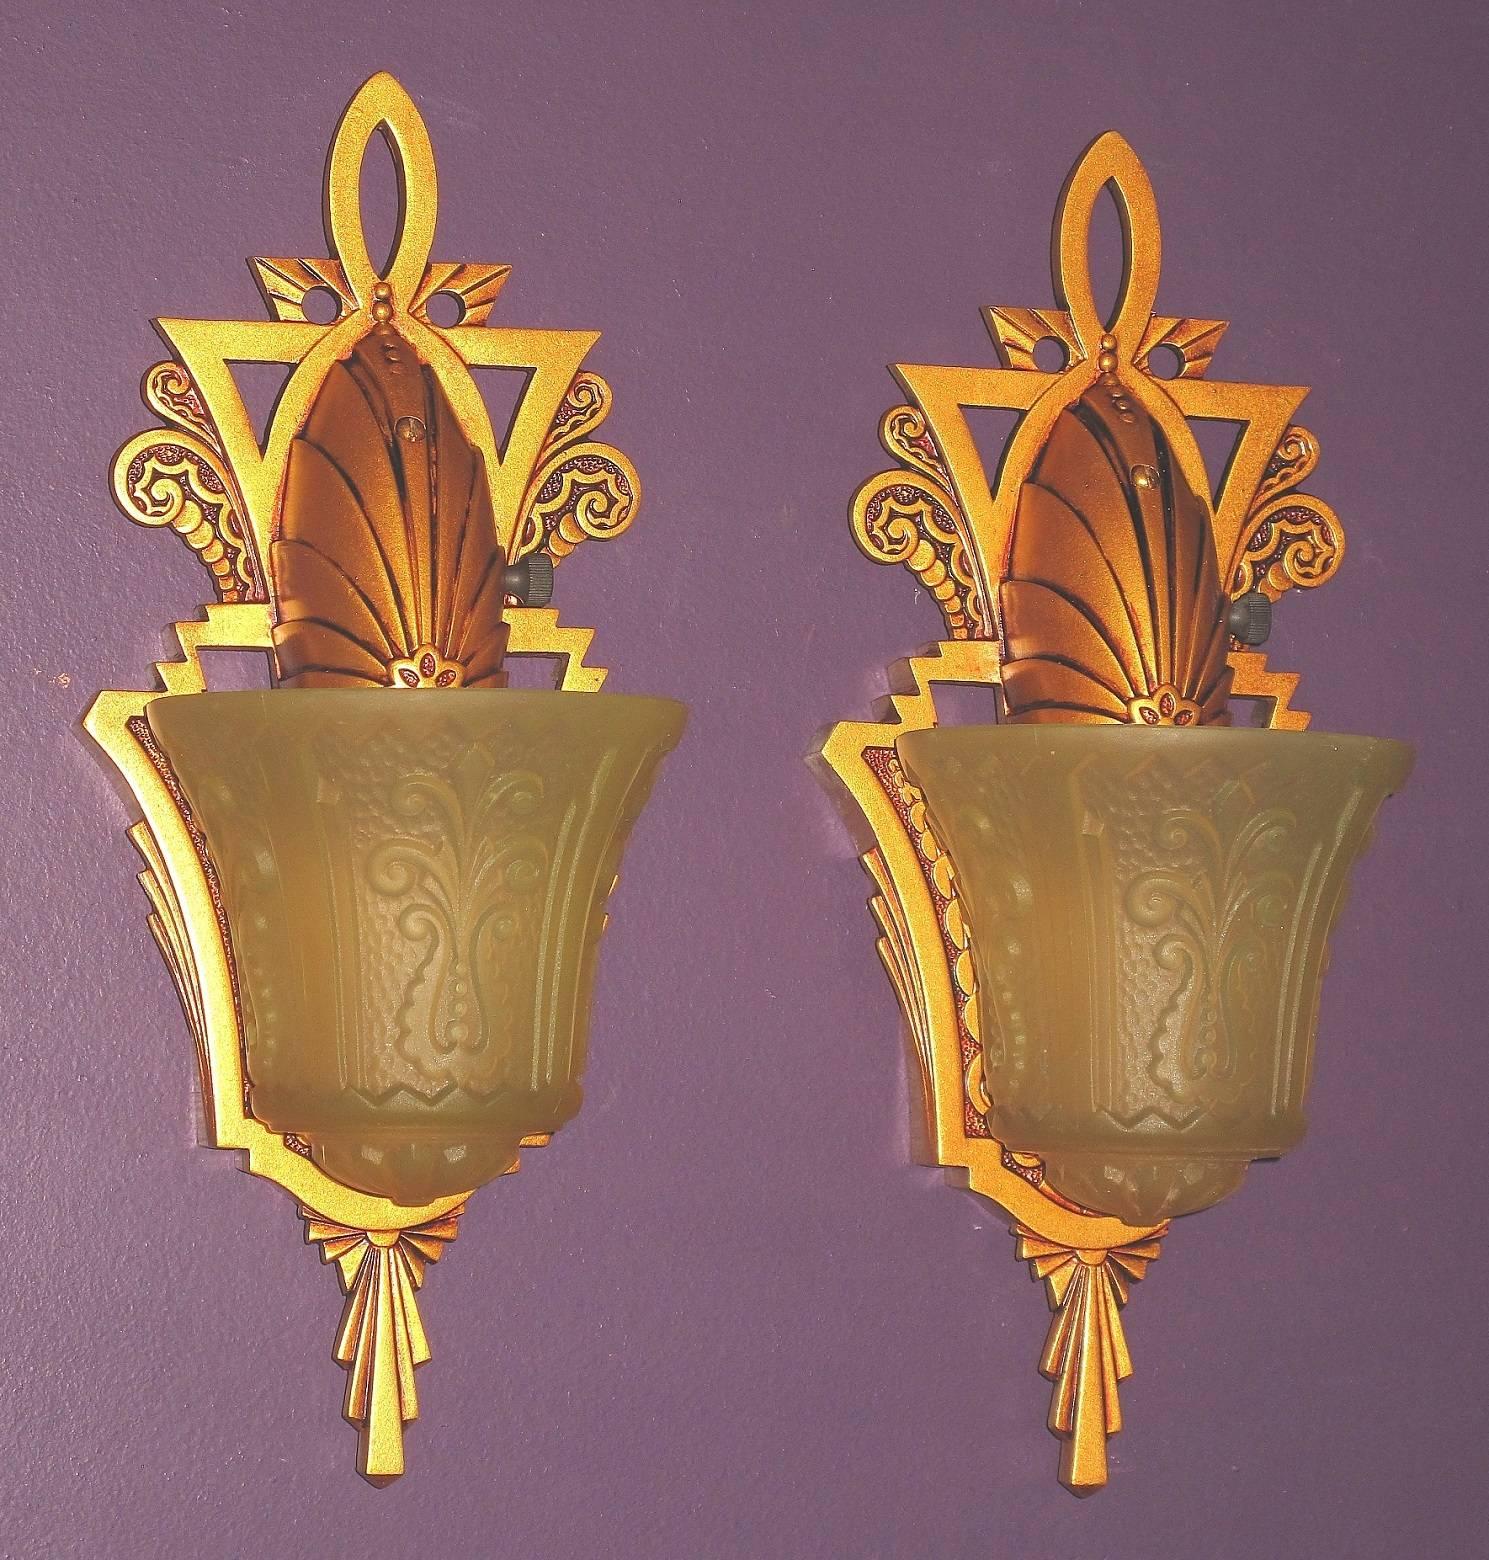 Aluminum Pair of Beardslee Art Deco Slip Shade Sconces Warm Golden with Amber Shades For Sale